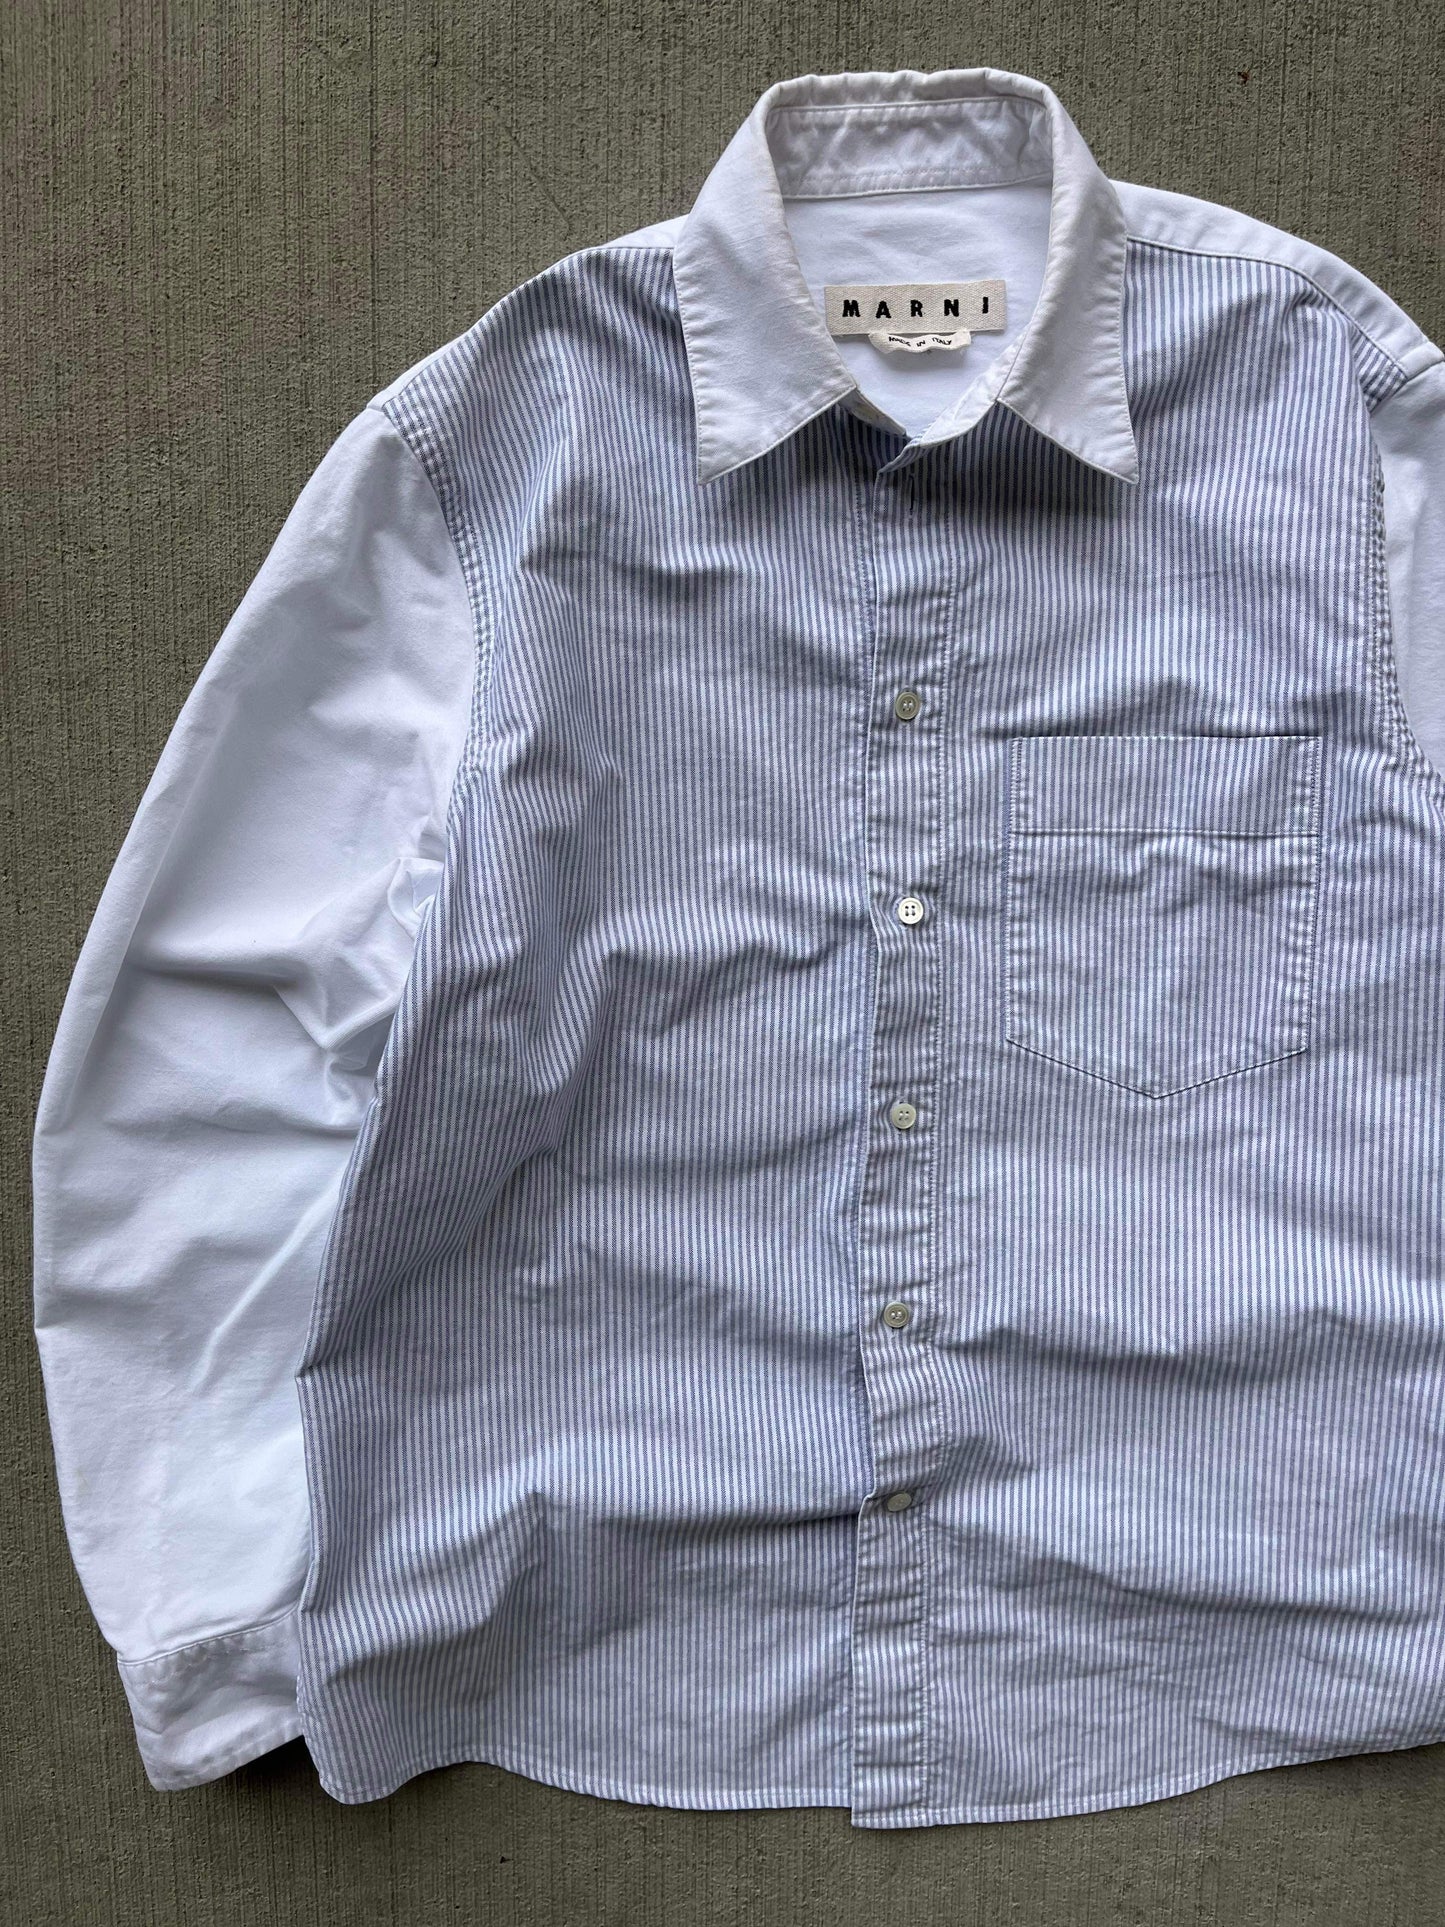 (S/M) Marni Made in Italy Button Up Shirt